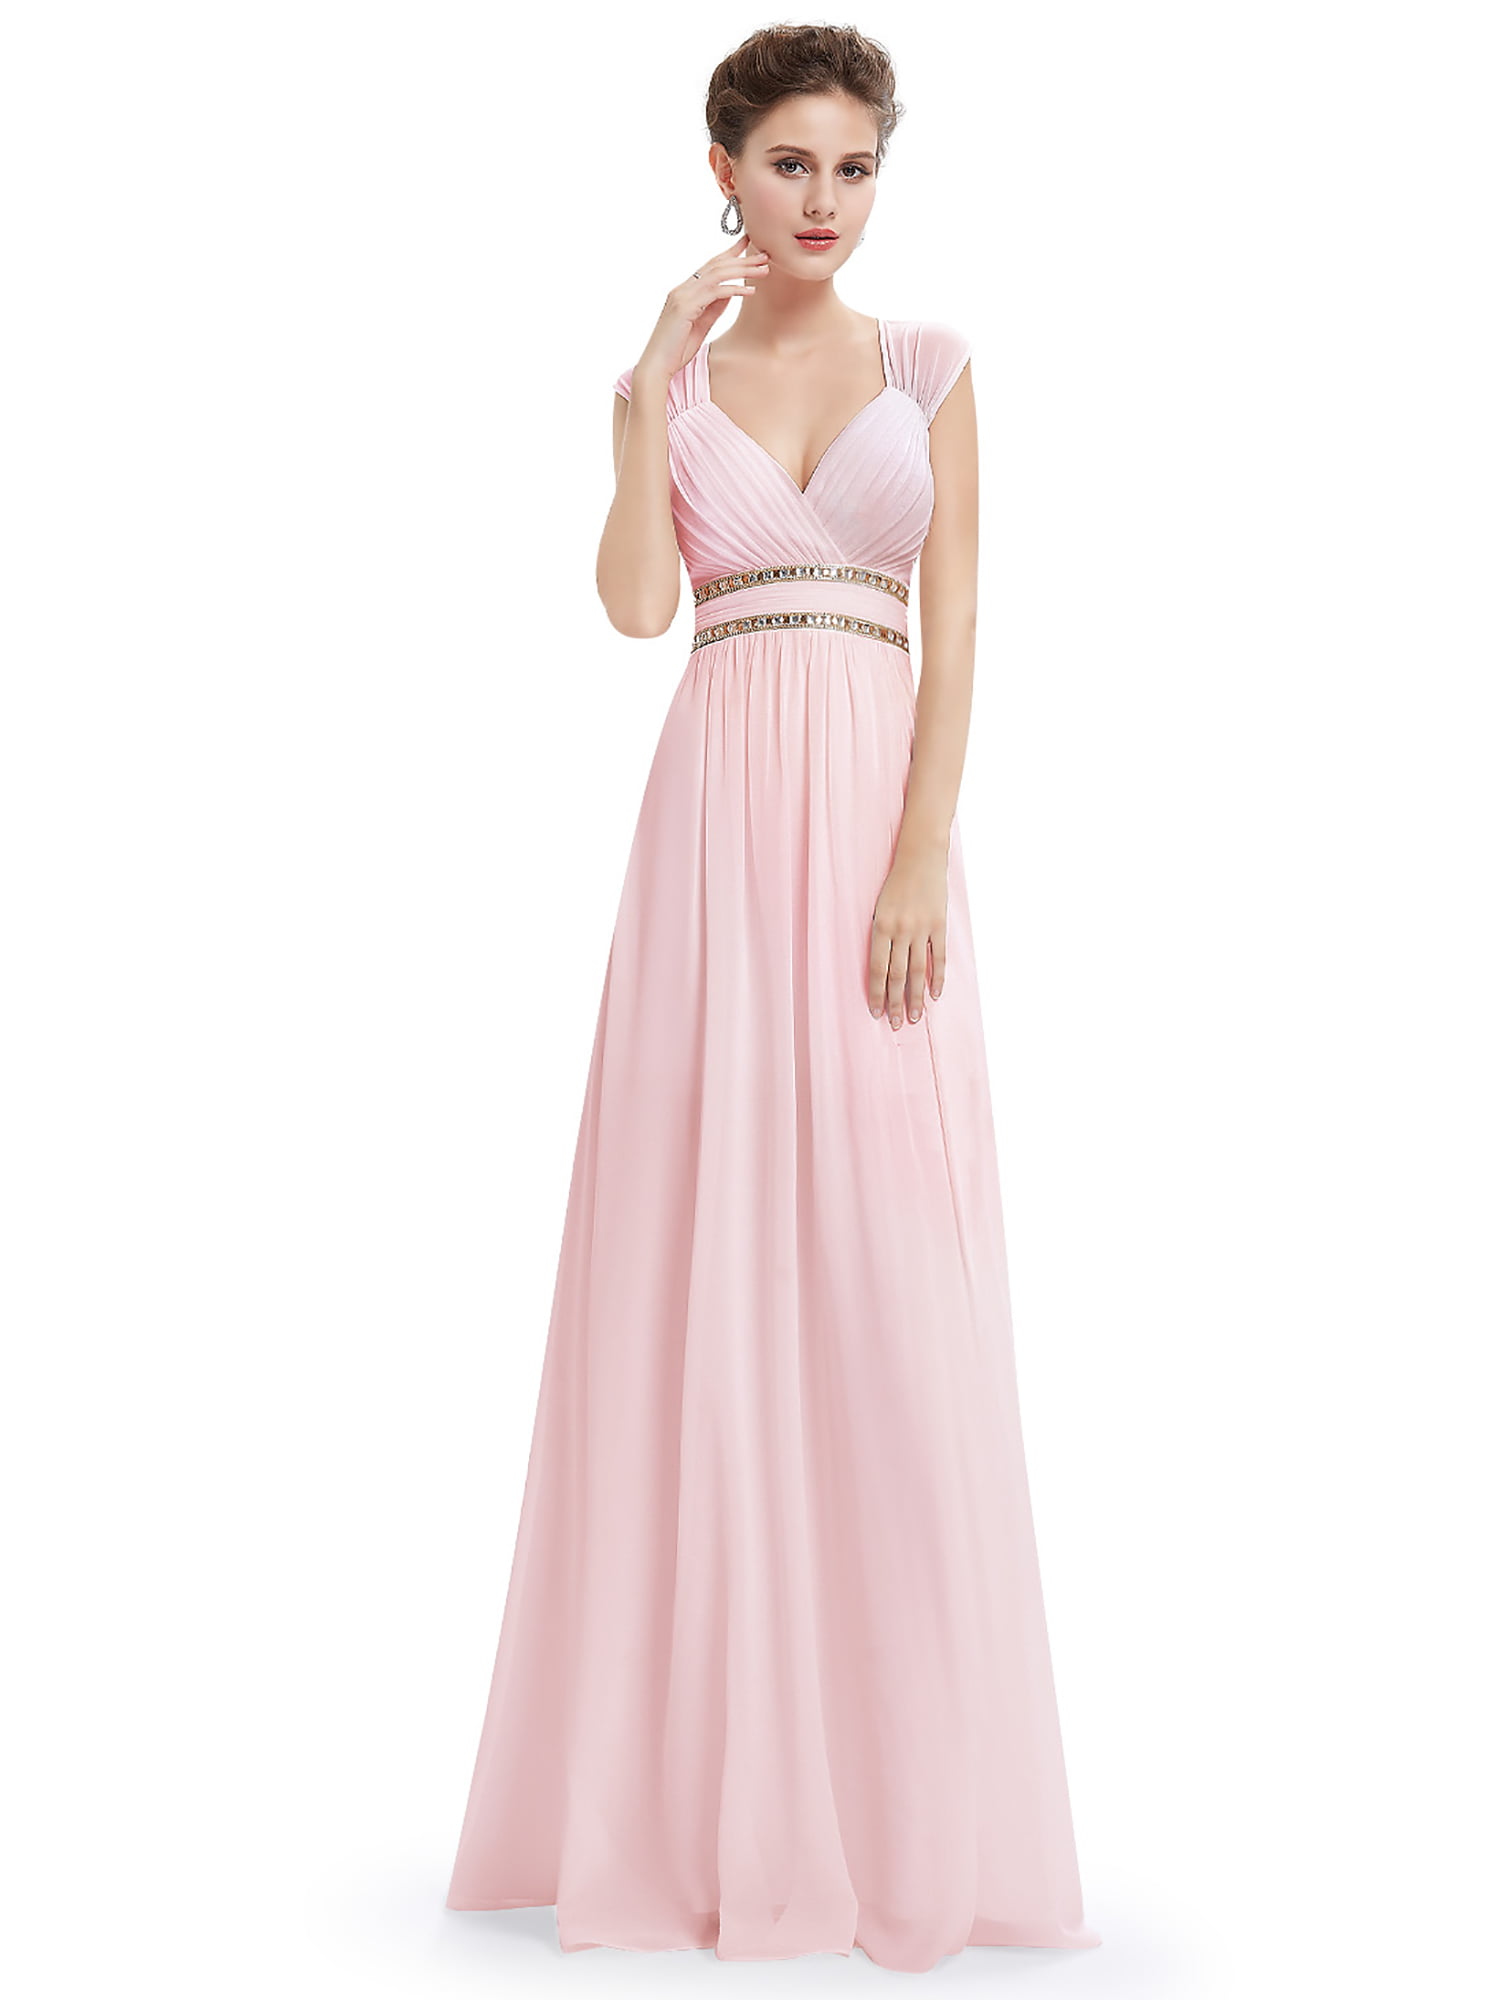 Ever pretty Chiffon Long prom dress Bridesmaid Dresses  Gown Evening Party UK 